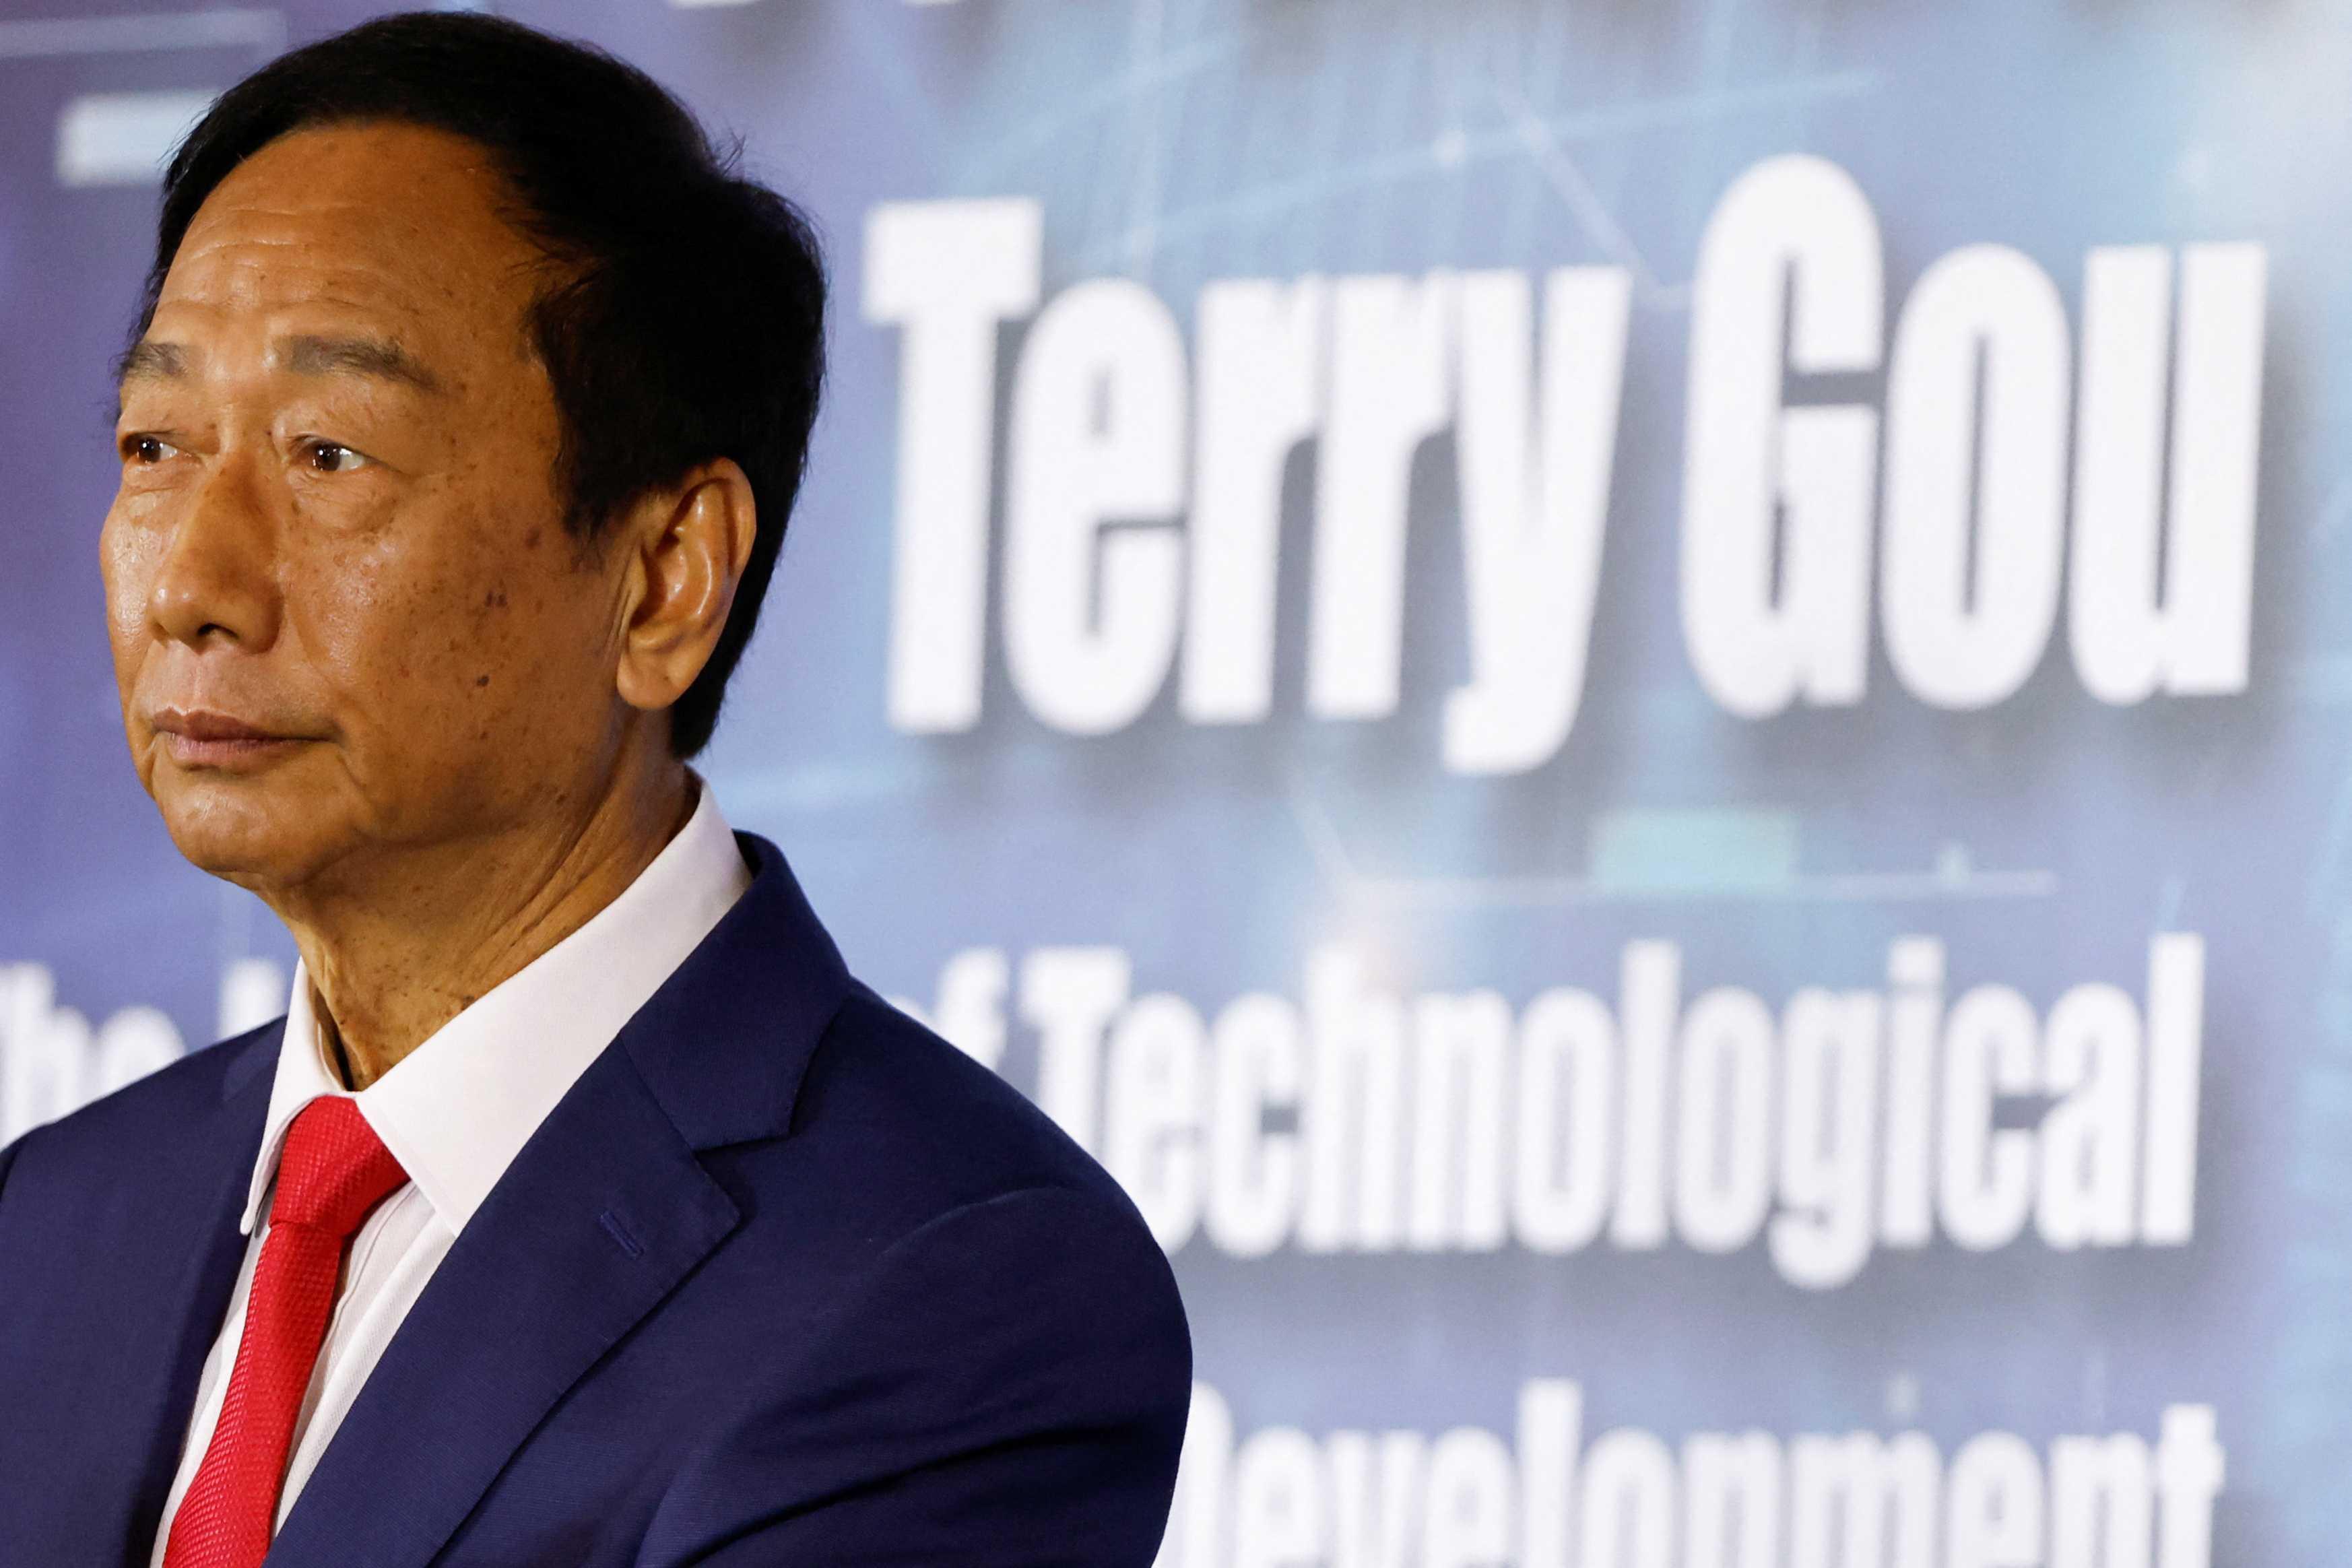 Terry Gou, founder of Taiwan's Foxconn, makes a pause while speaking during a news conference in Taoyuan, Taiwan April 5. Photo: Reuters